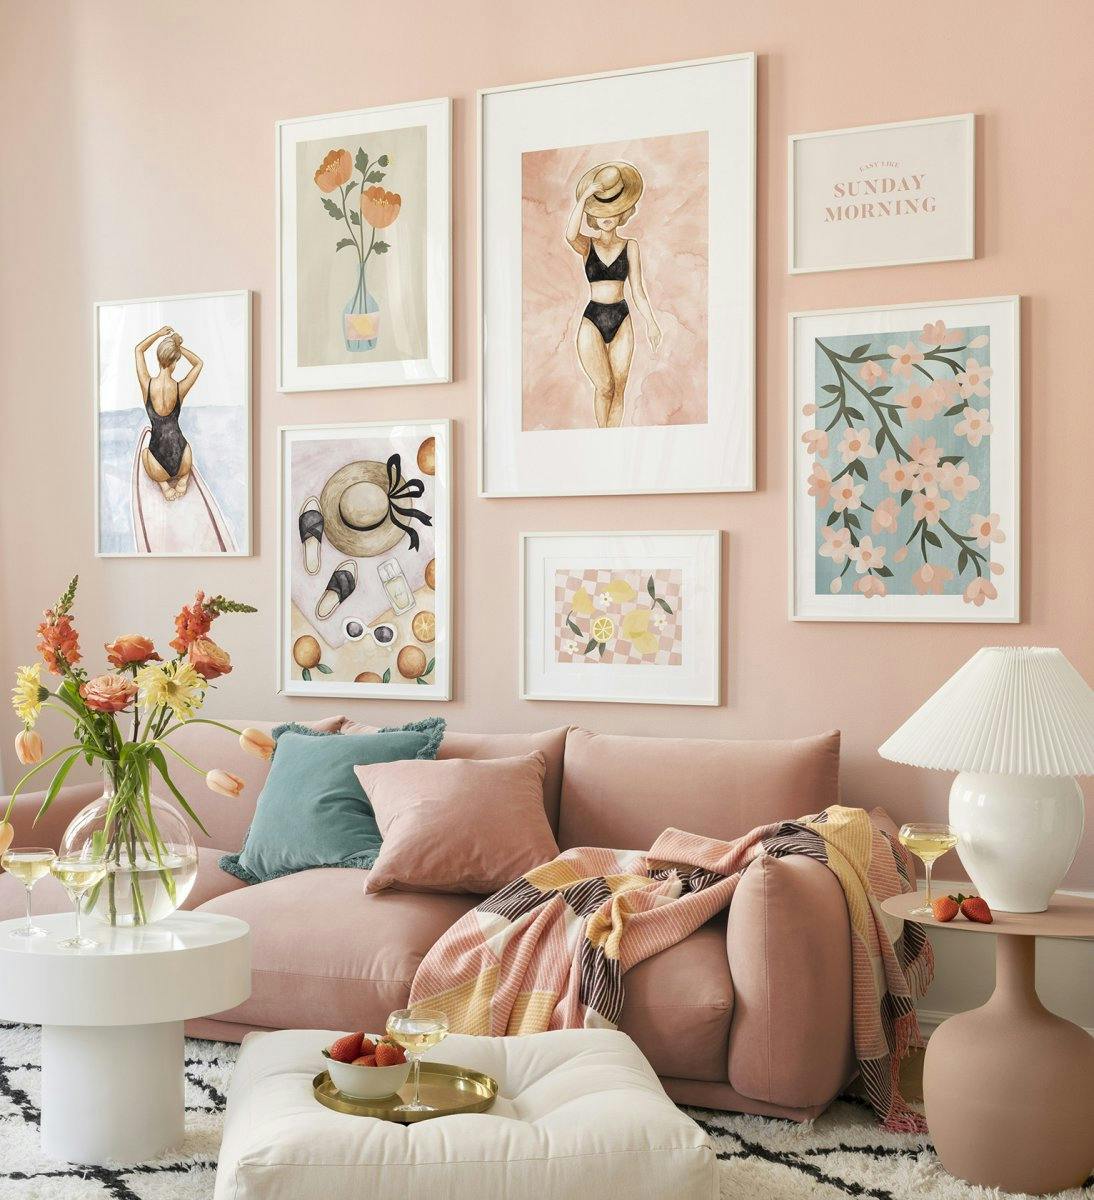 Colourful gallery wall with flower prints and illustrations in pink with white frames for living room